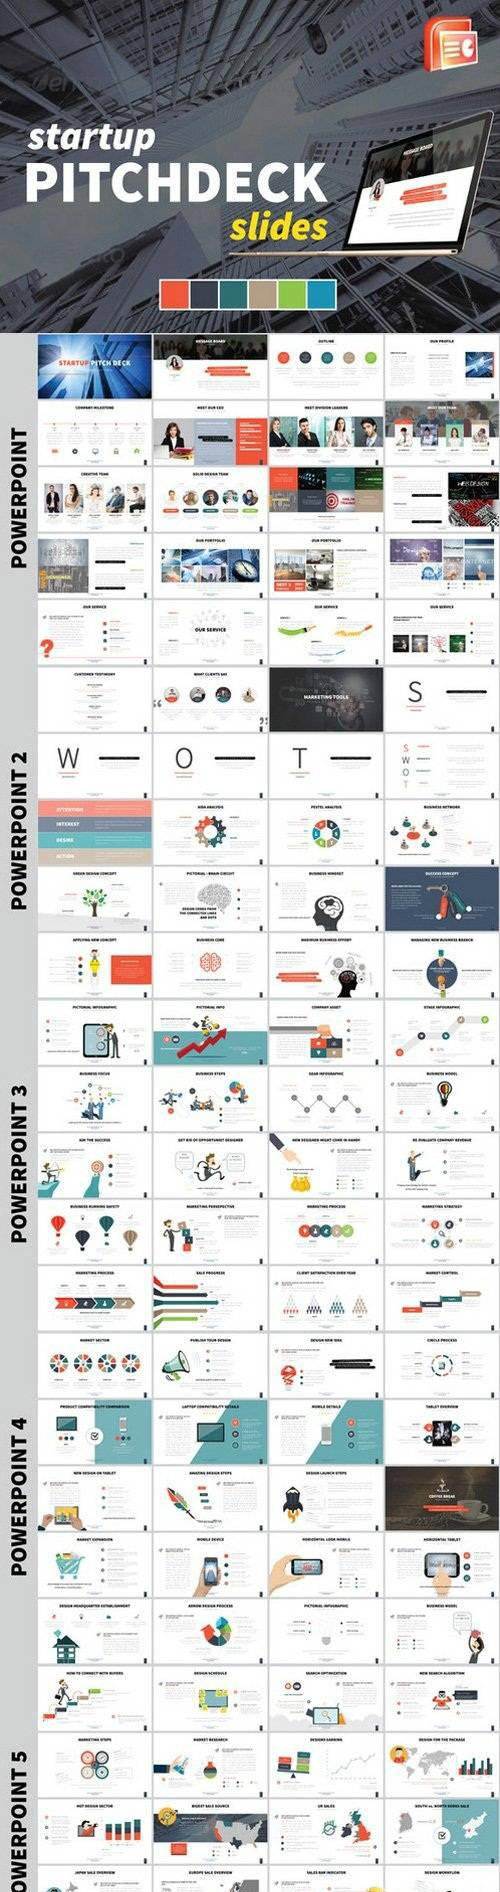 PowerPoint Template Startup Pitch Deck 575451